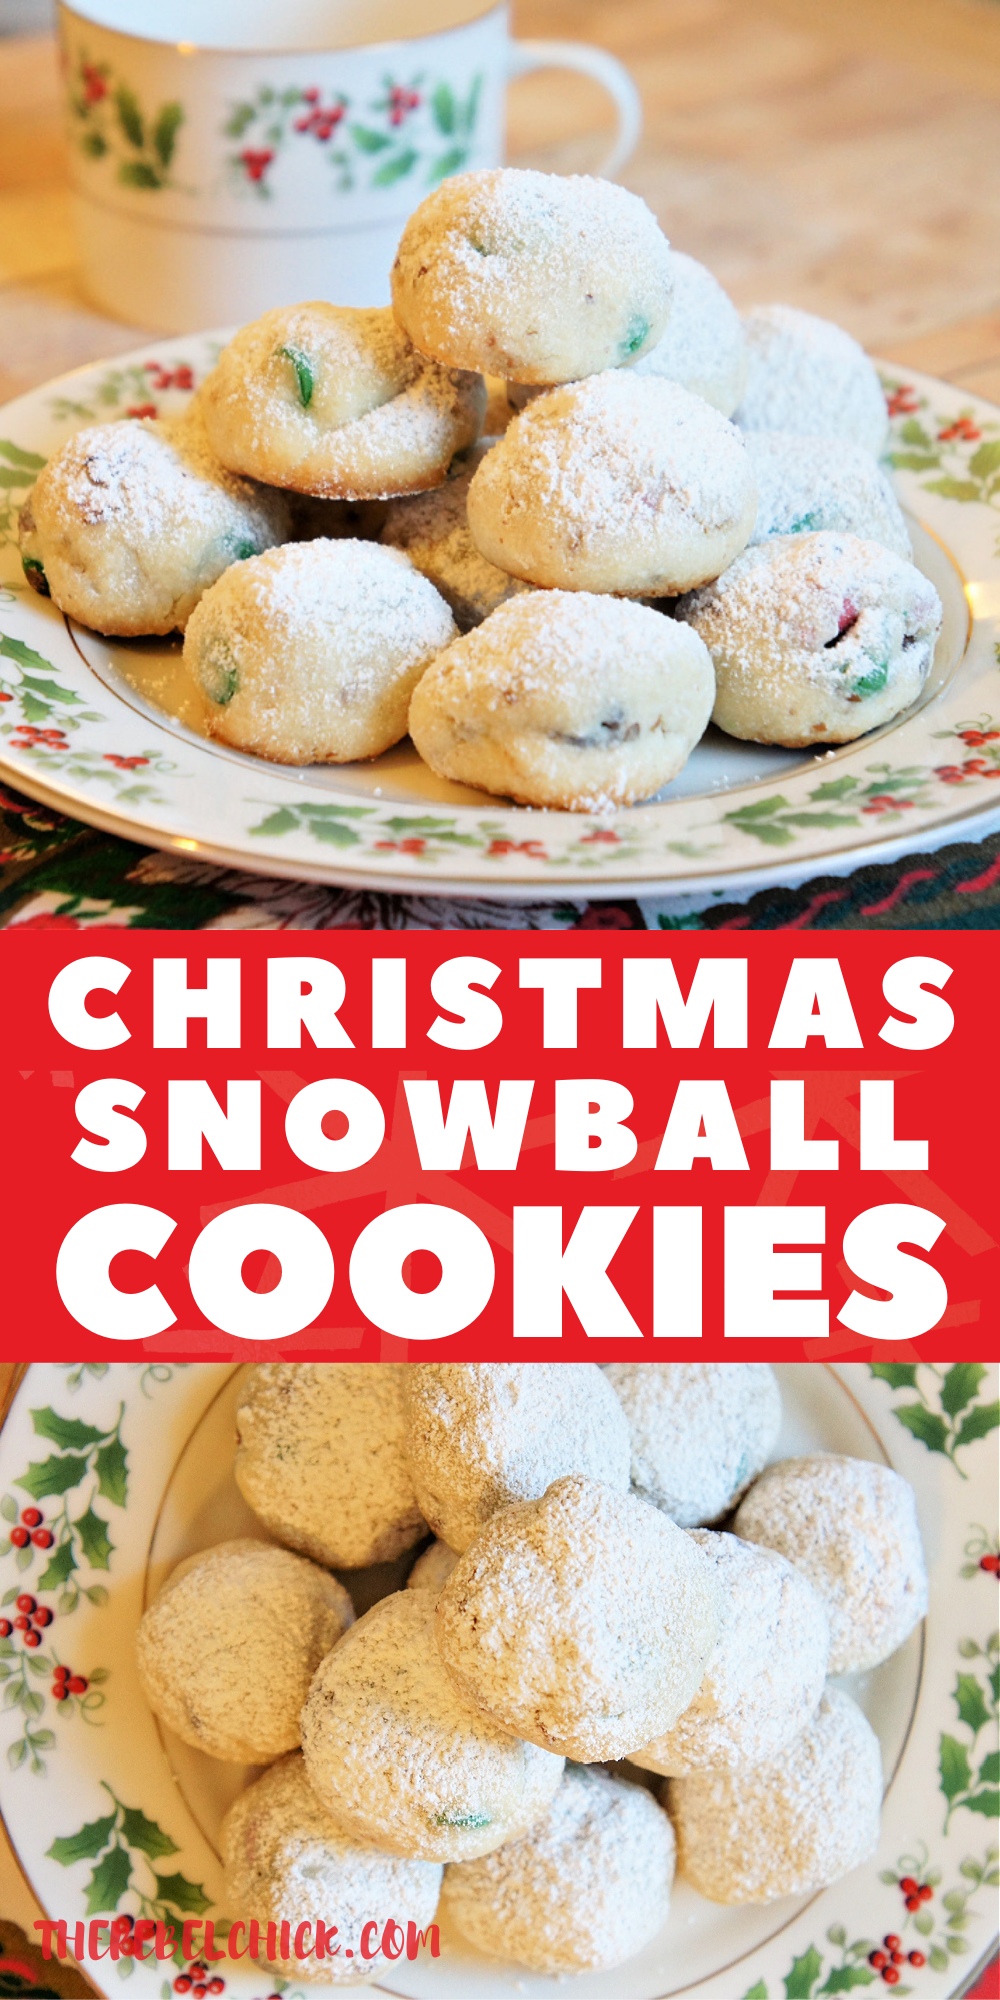 Super easy to make Christmas Snowball Cookies Recipe